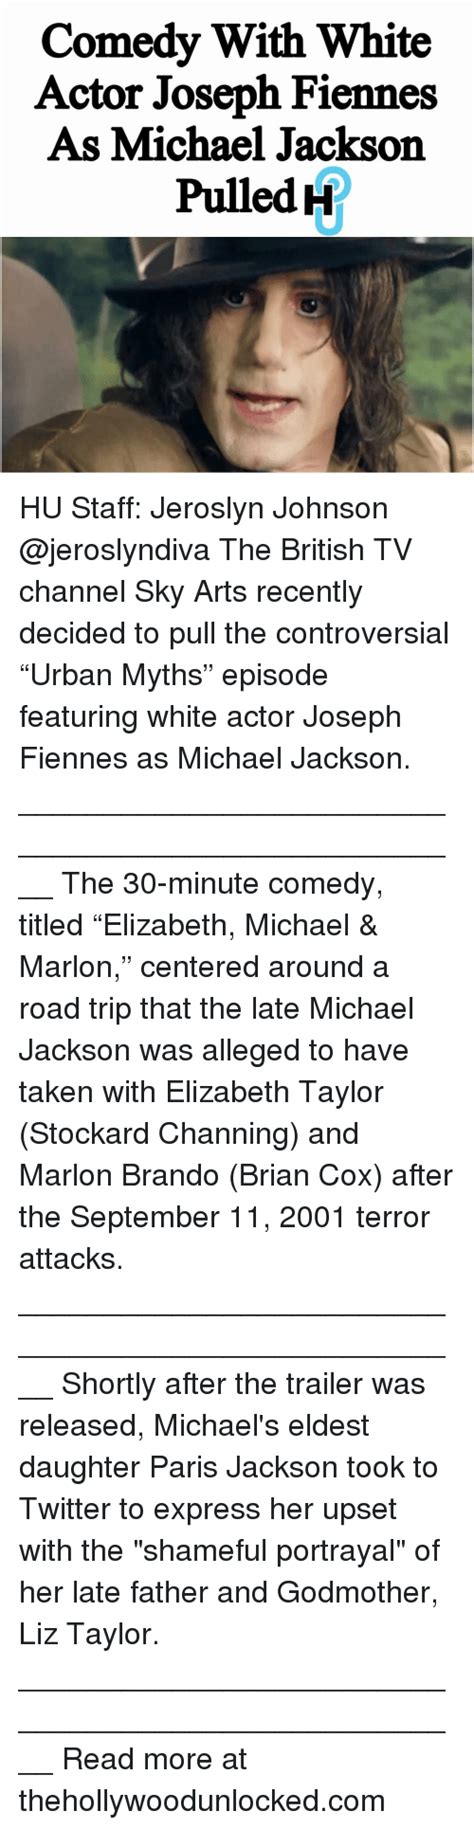 Comedy With White Actor Joseph Fiennes As Michael Jackson Pulled H Hu